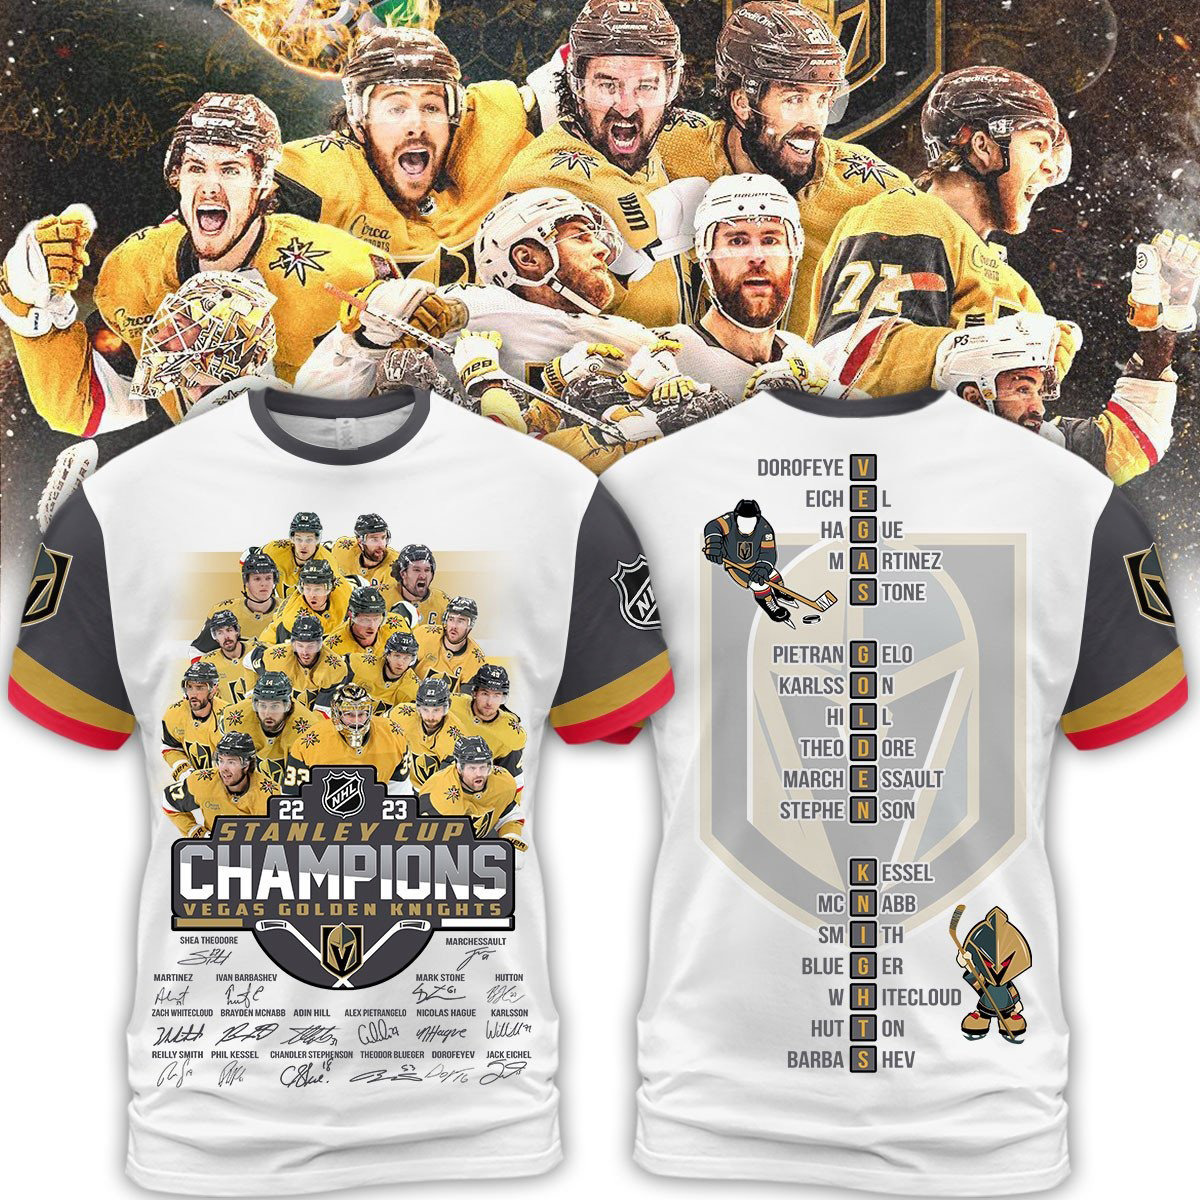 Vegas Golden Knights Stanley Cup Champions 2023 First Time Champions White  Design Hoodie T Shirt - Growkoc